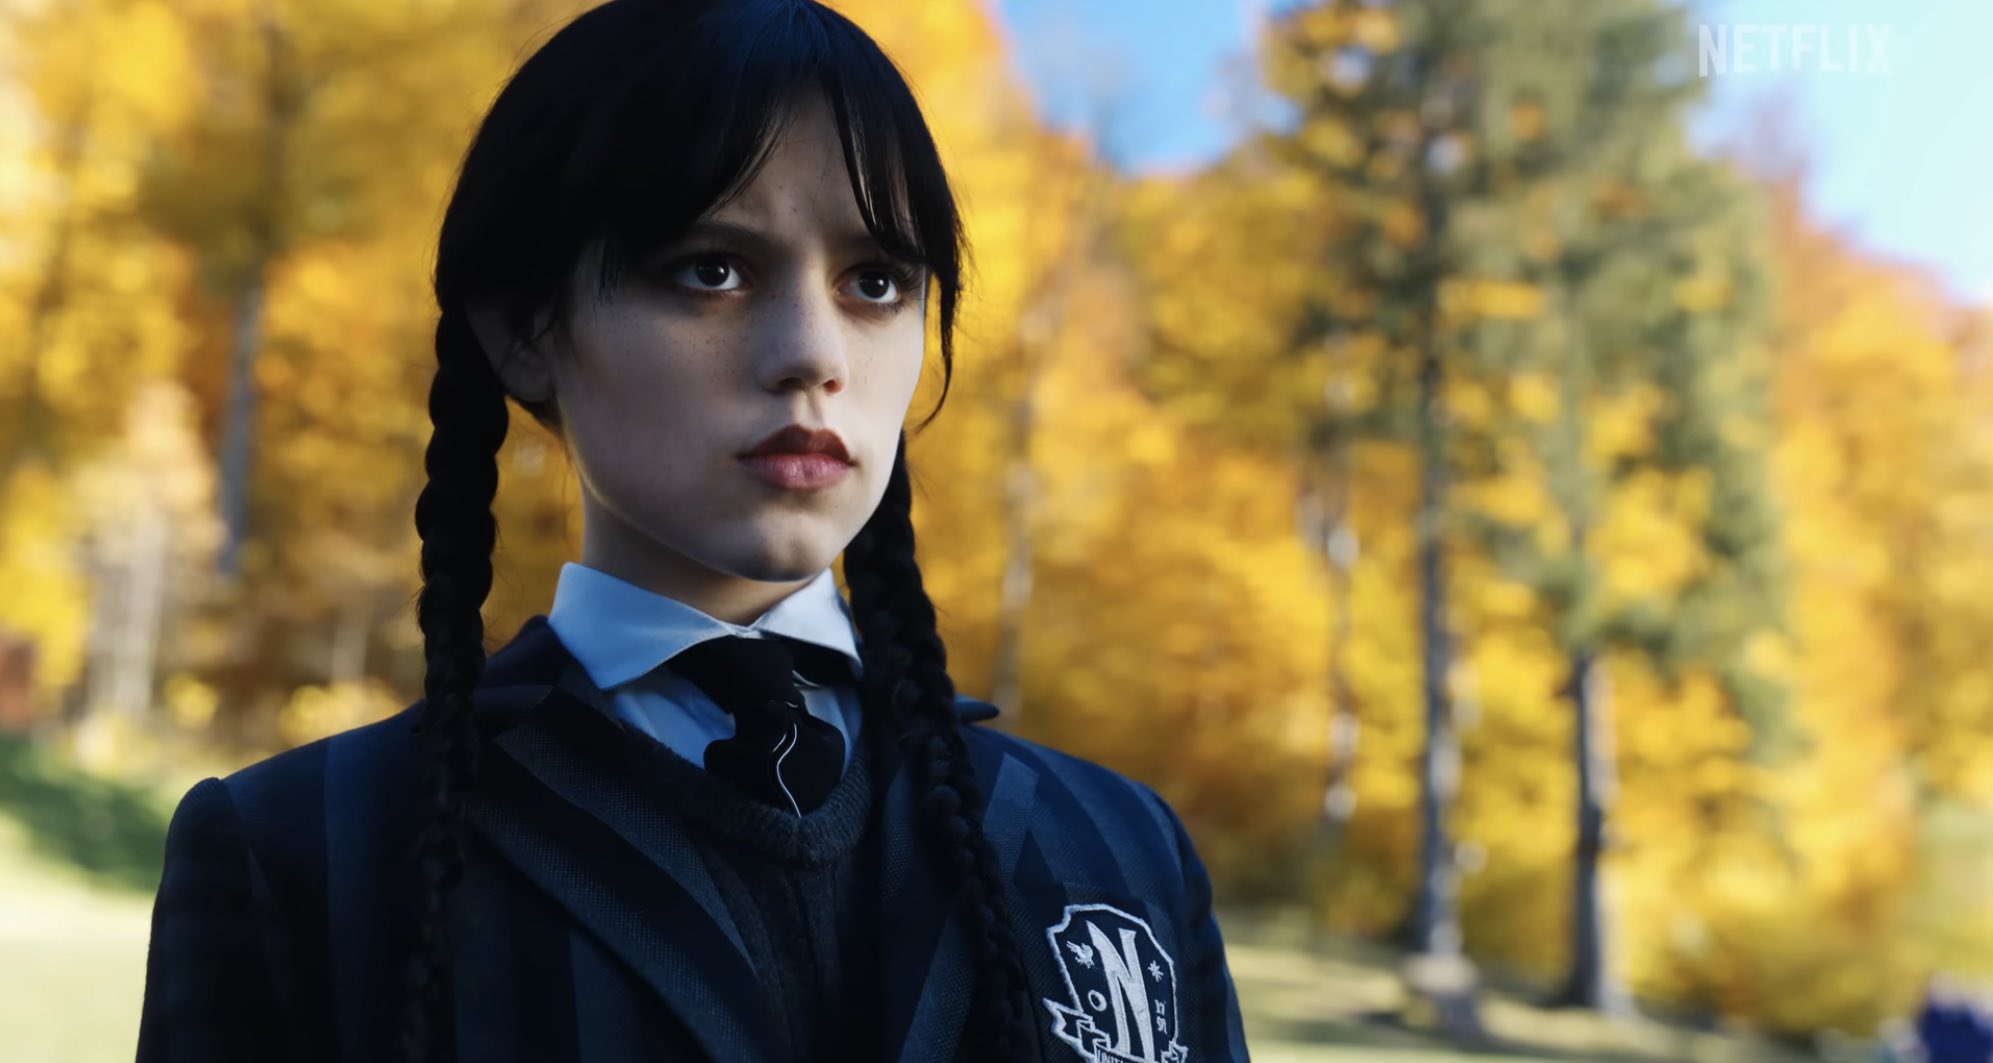 Addy Carter image of Jenna Ortega as Wednesday Addams in Netflix's Wednesday series. Coming soon